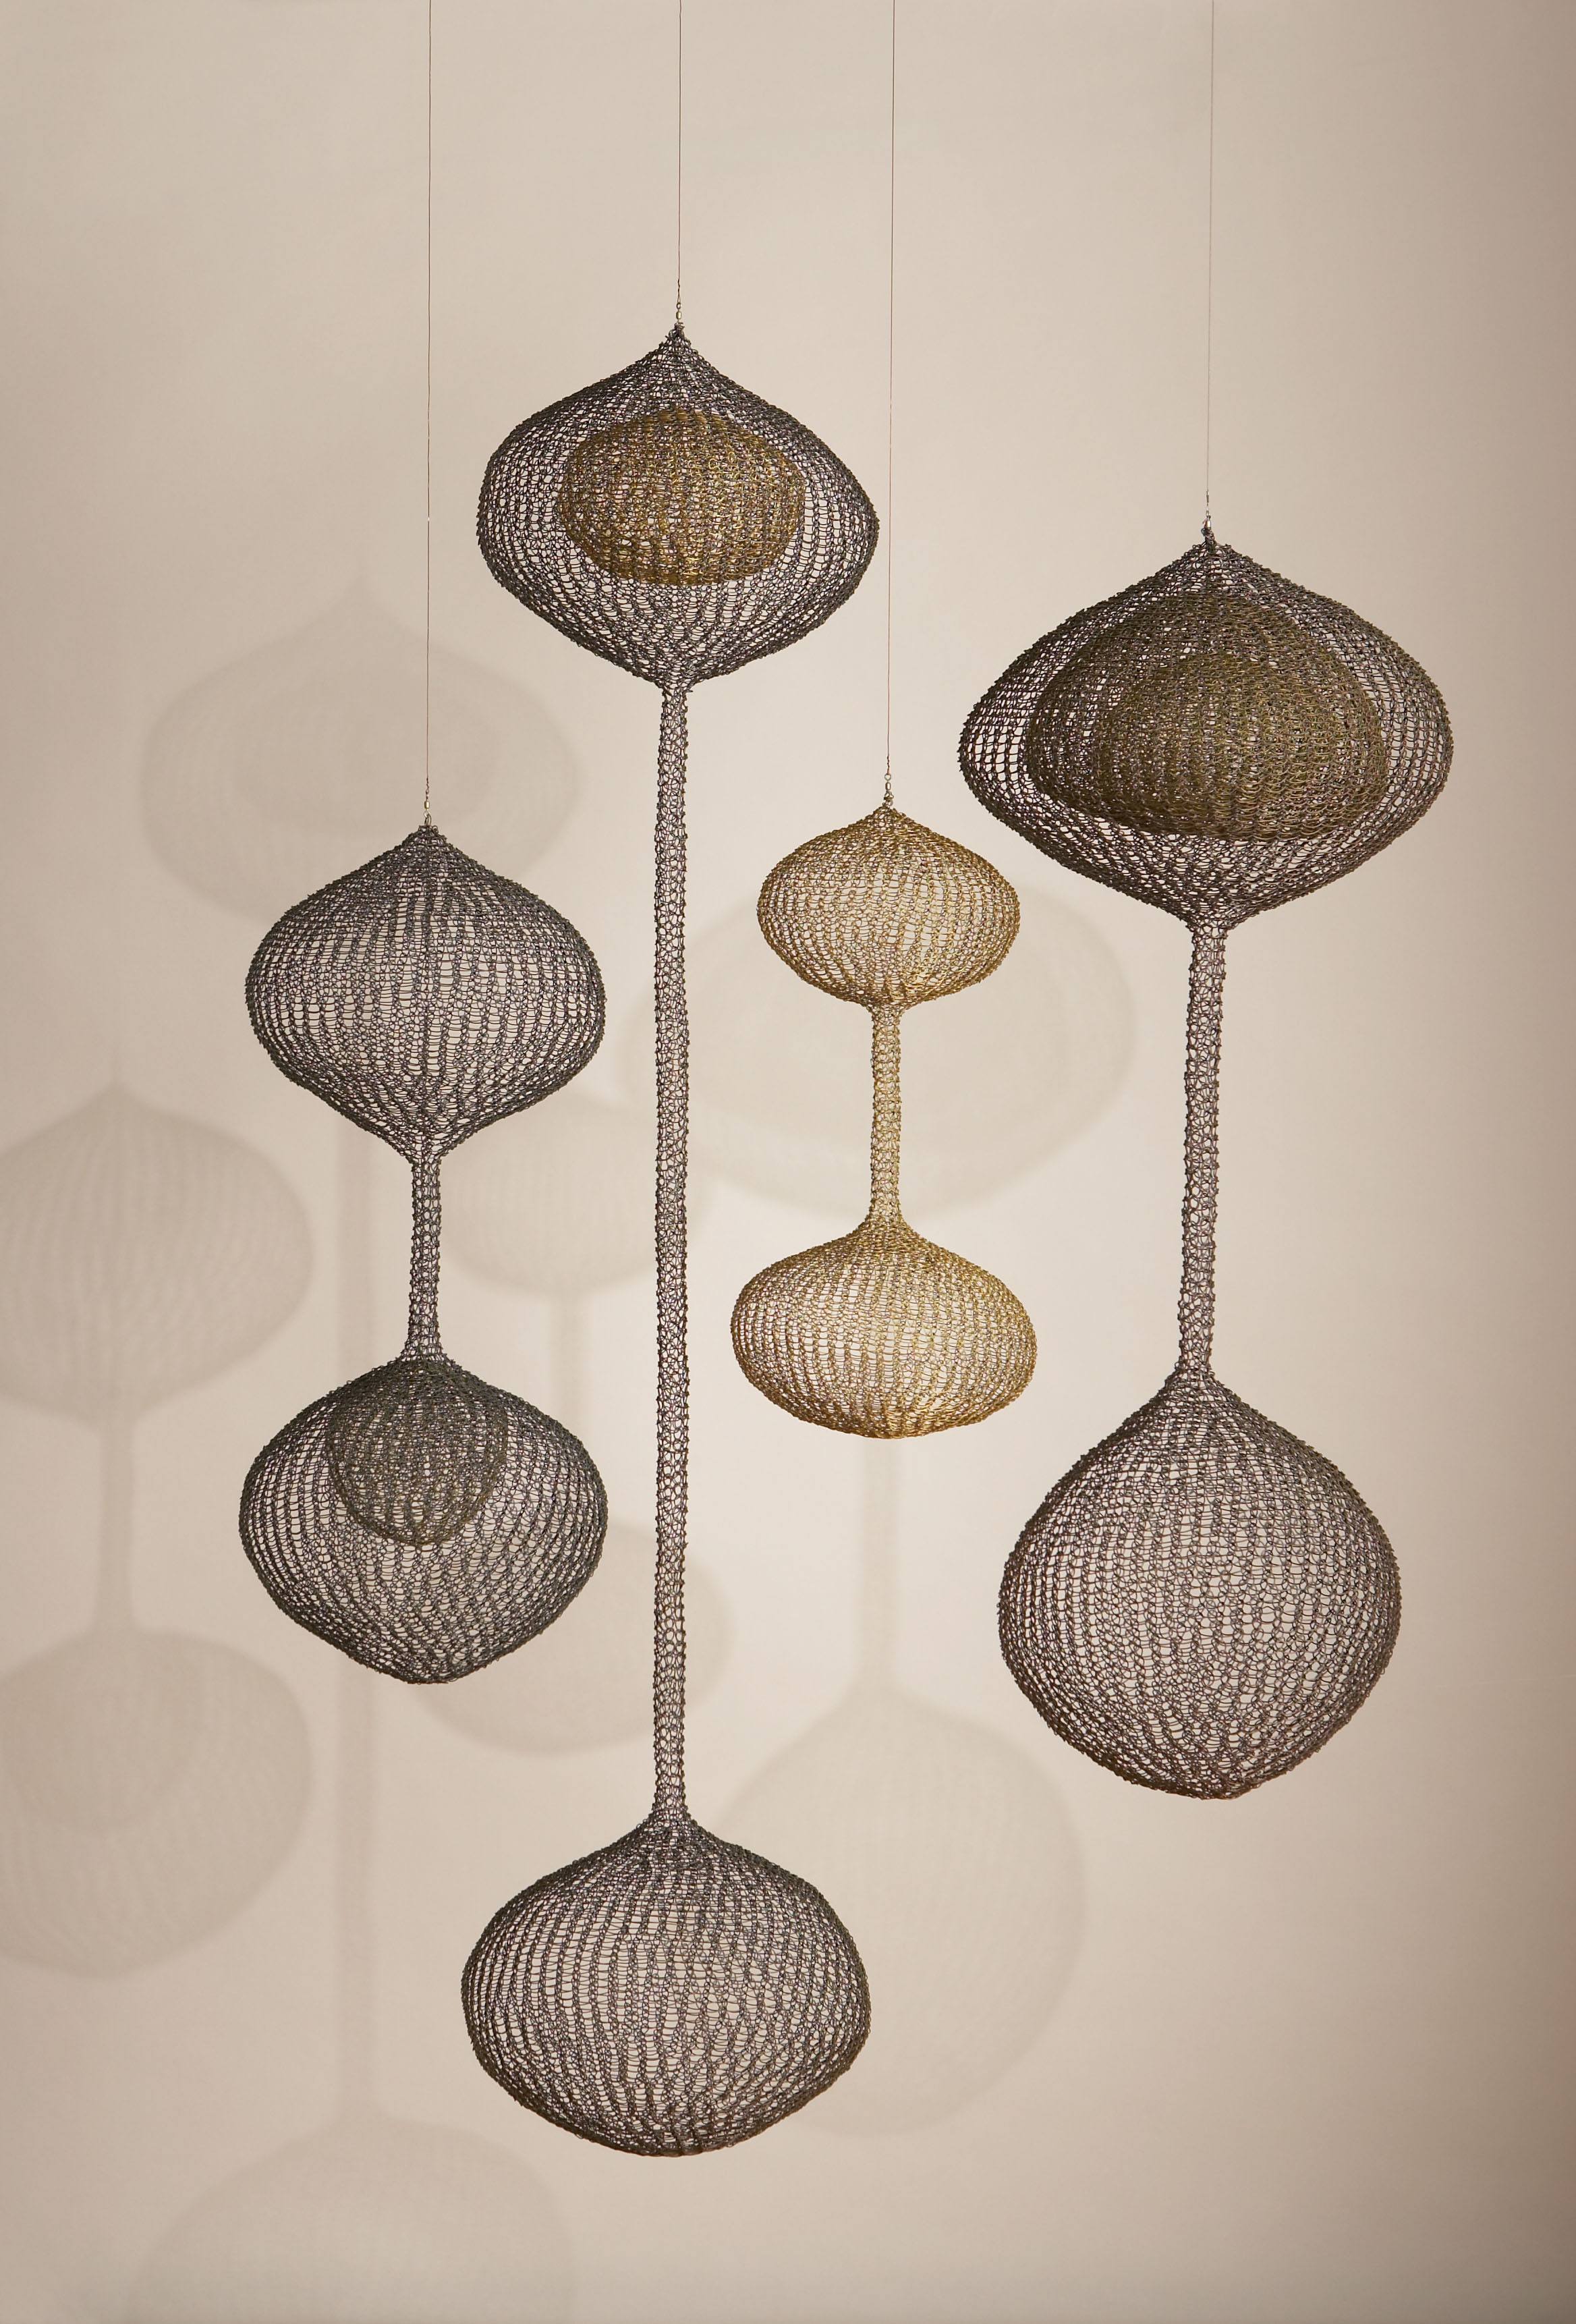 Four hanging wire sculptures by Ruth Asawa.